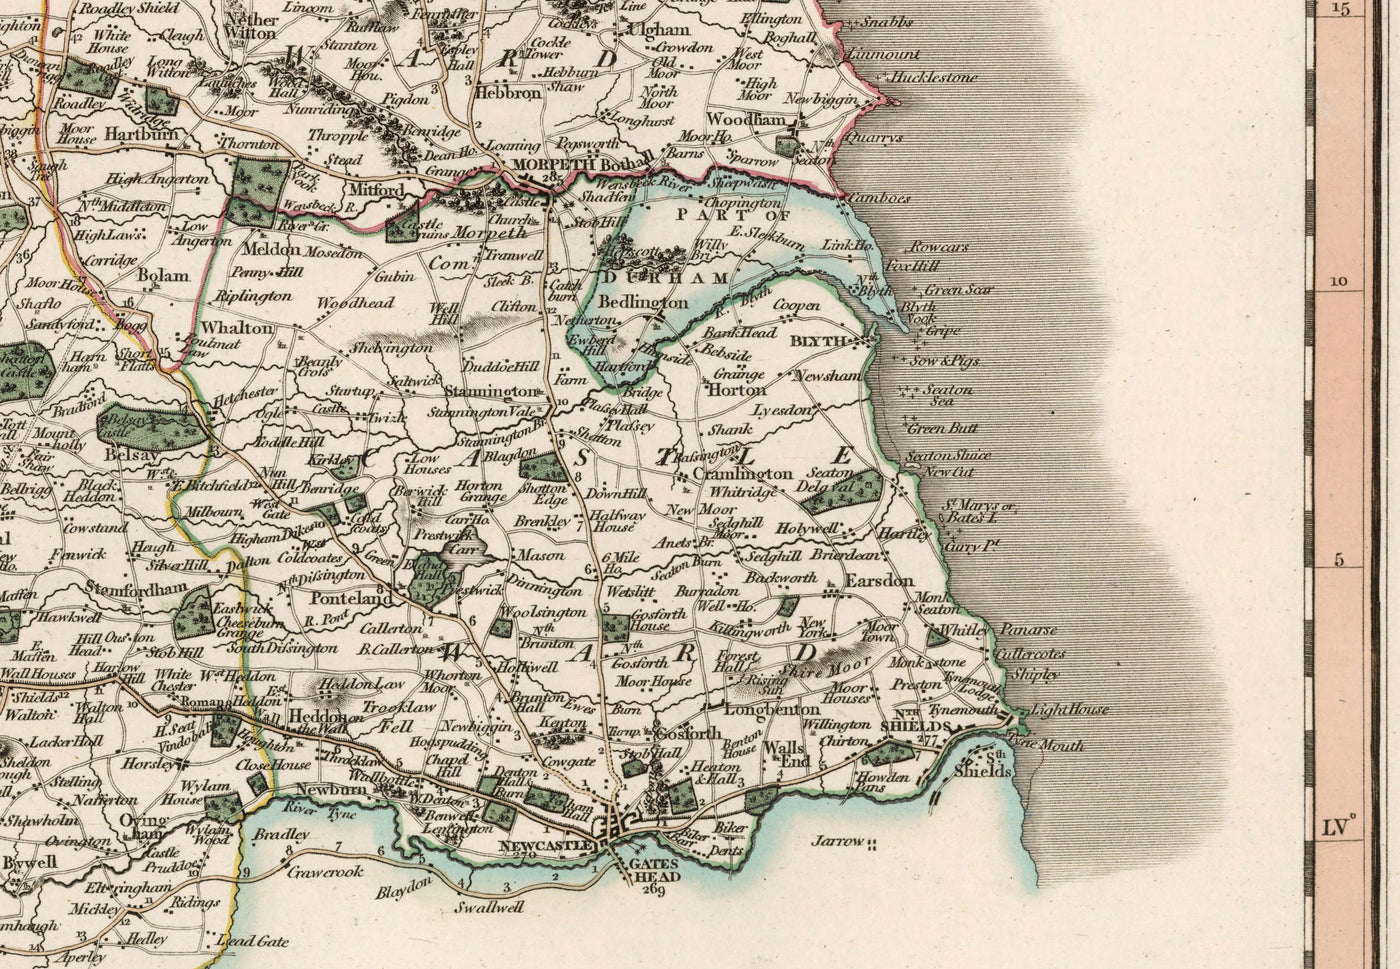 Old Map of Northumberland in 1801 by John Cary - Newcastle, Belford, Hexham, Haltwhistle, Durham